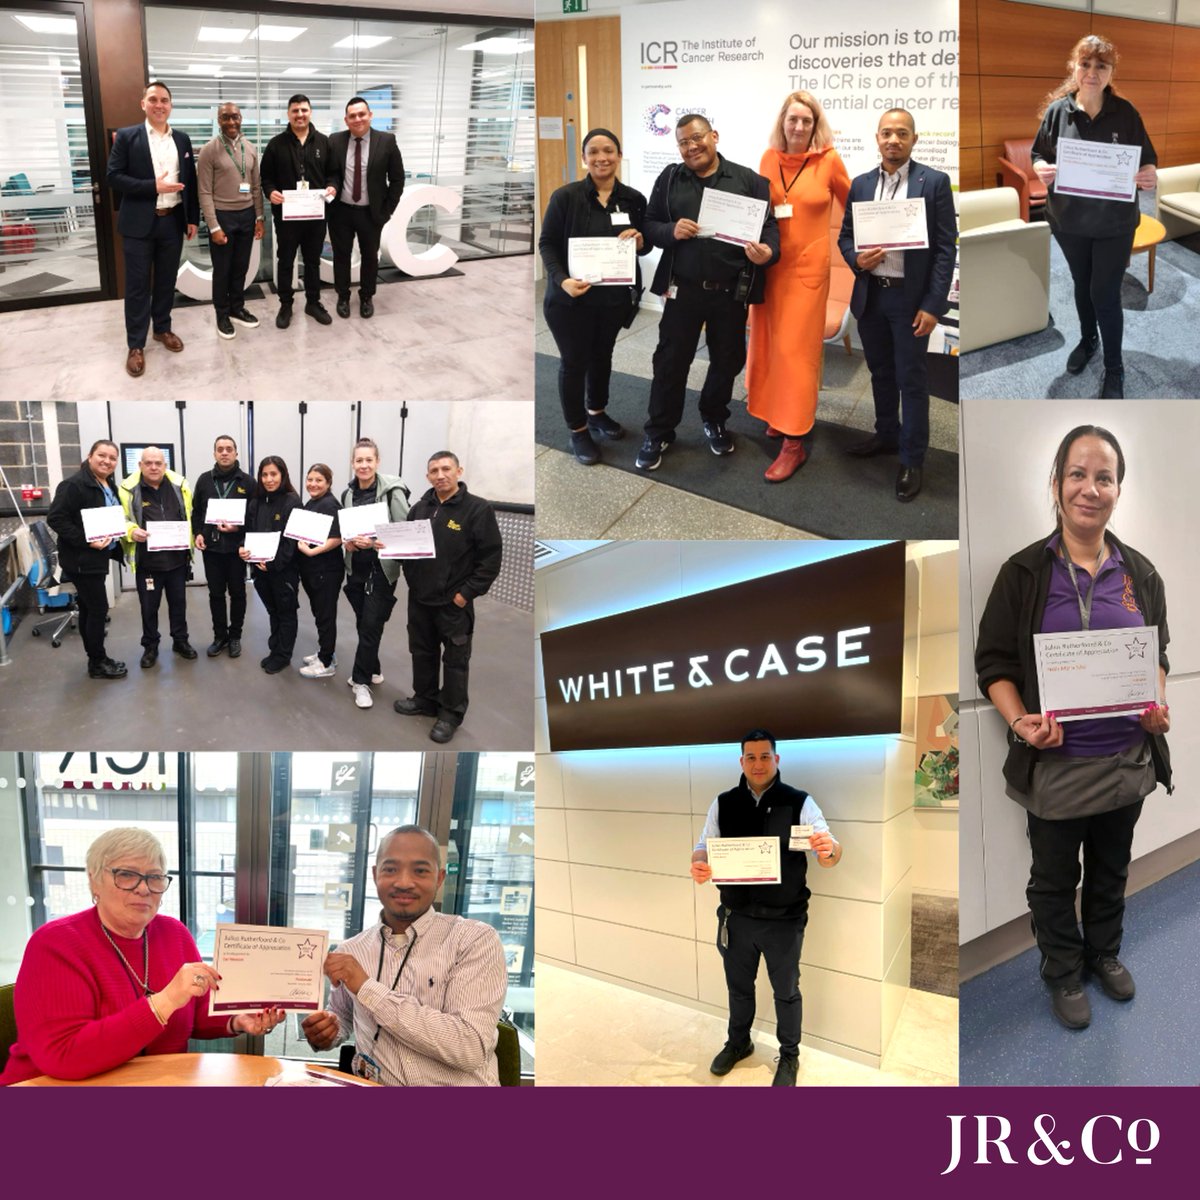 Every member of our teams embodies our values of being meticulous, passionate, expert and personal. And on this Employee Appreciation Day, the spotlight shines on all the incredible people at JR&Co. Your hard work doesn't just clean; it empowers. Here's to you! #ThankYou